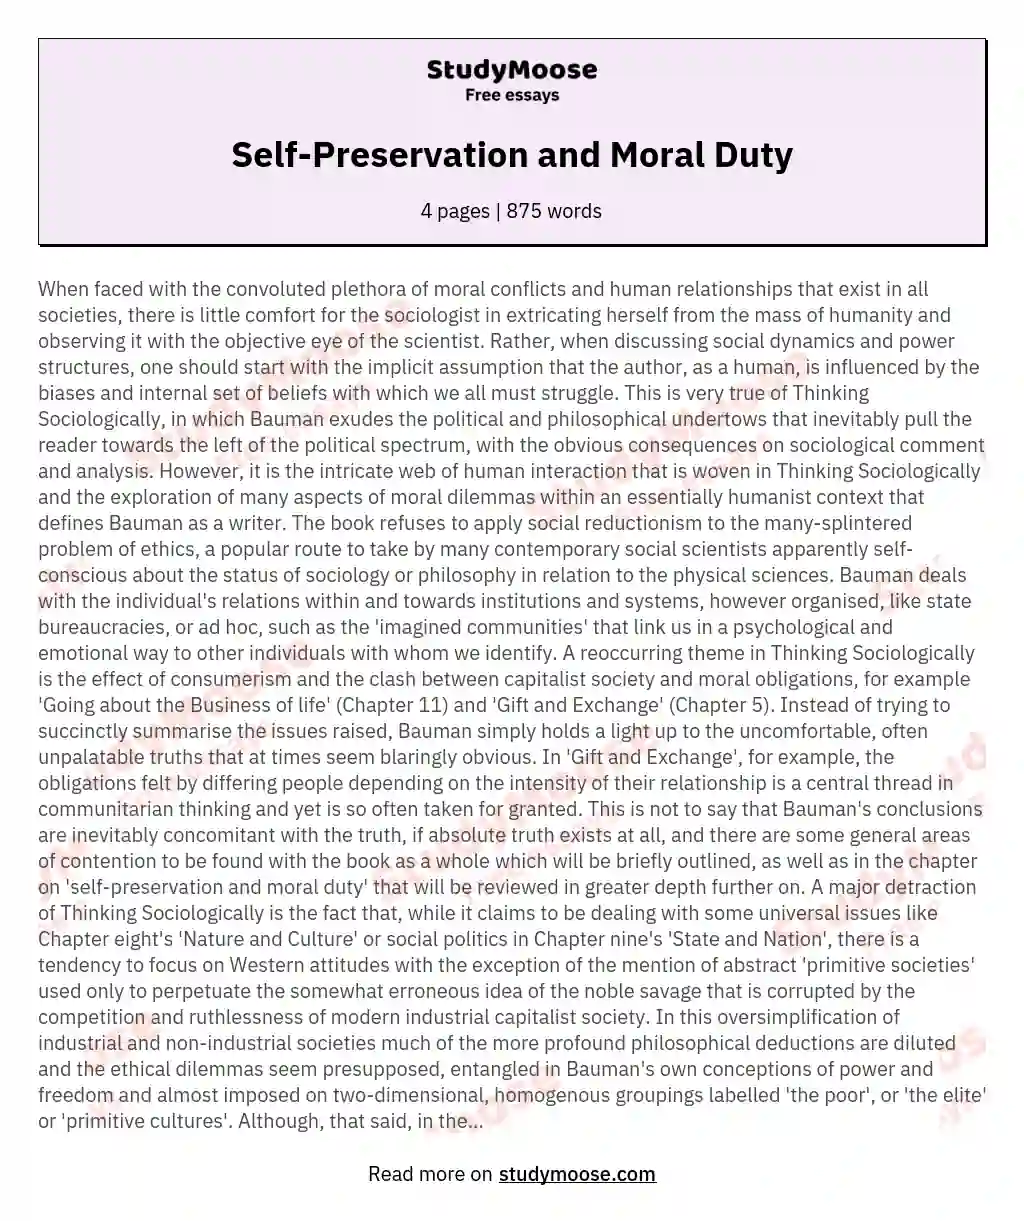 Self-Preservation and Moral Duty essay